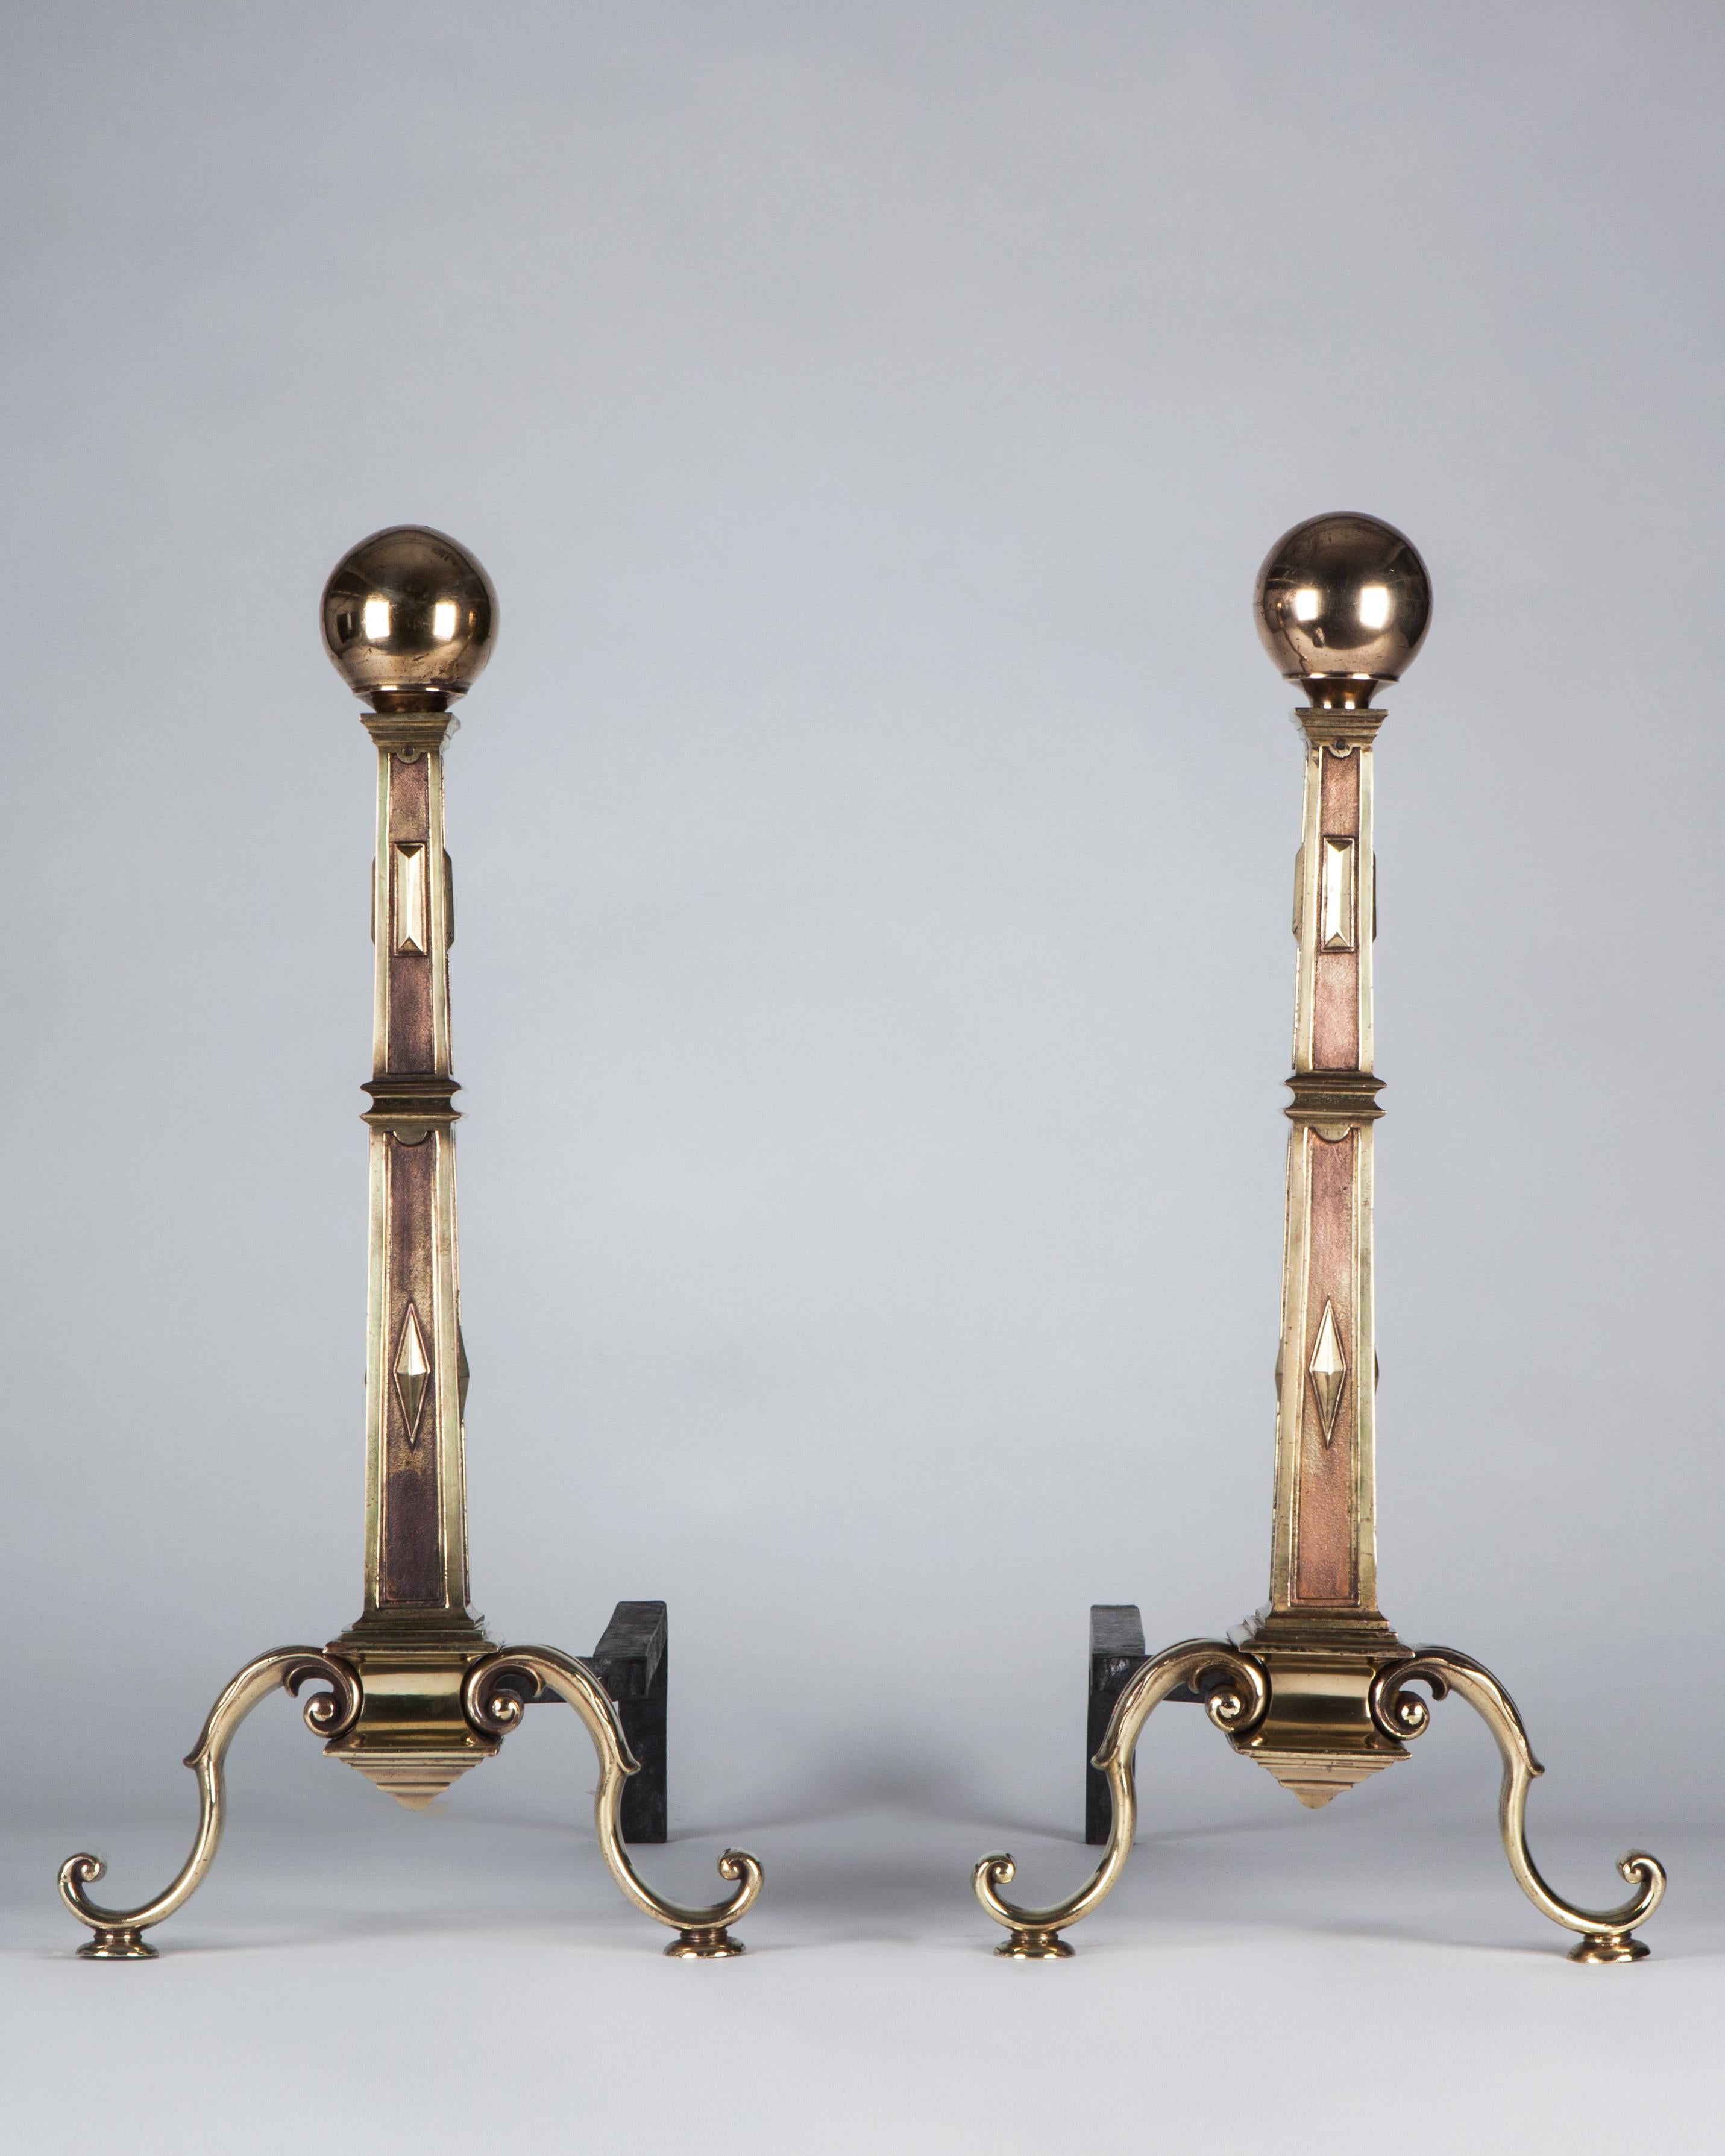 AFP0607

A pair of antique cast bronze andirons in their original age-darkened finish, circa 1920s. With finely modeled tapered square columns topped by ball finials, set on cove bases and S-scroll feet. Sharp details and thoughtful proportions mark